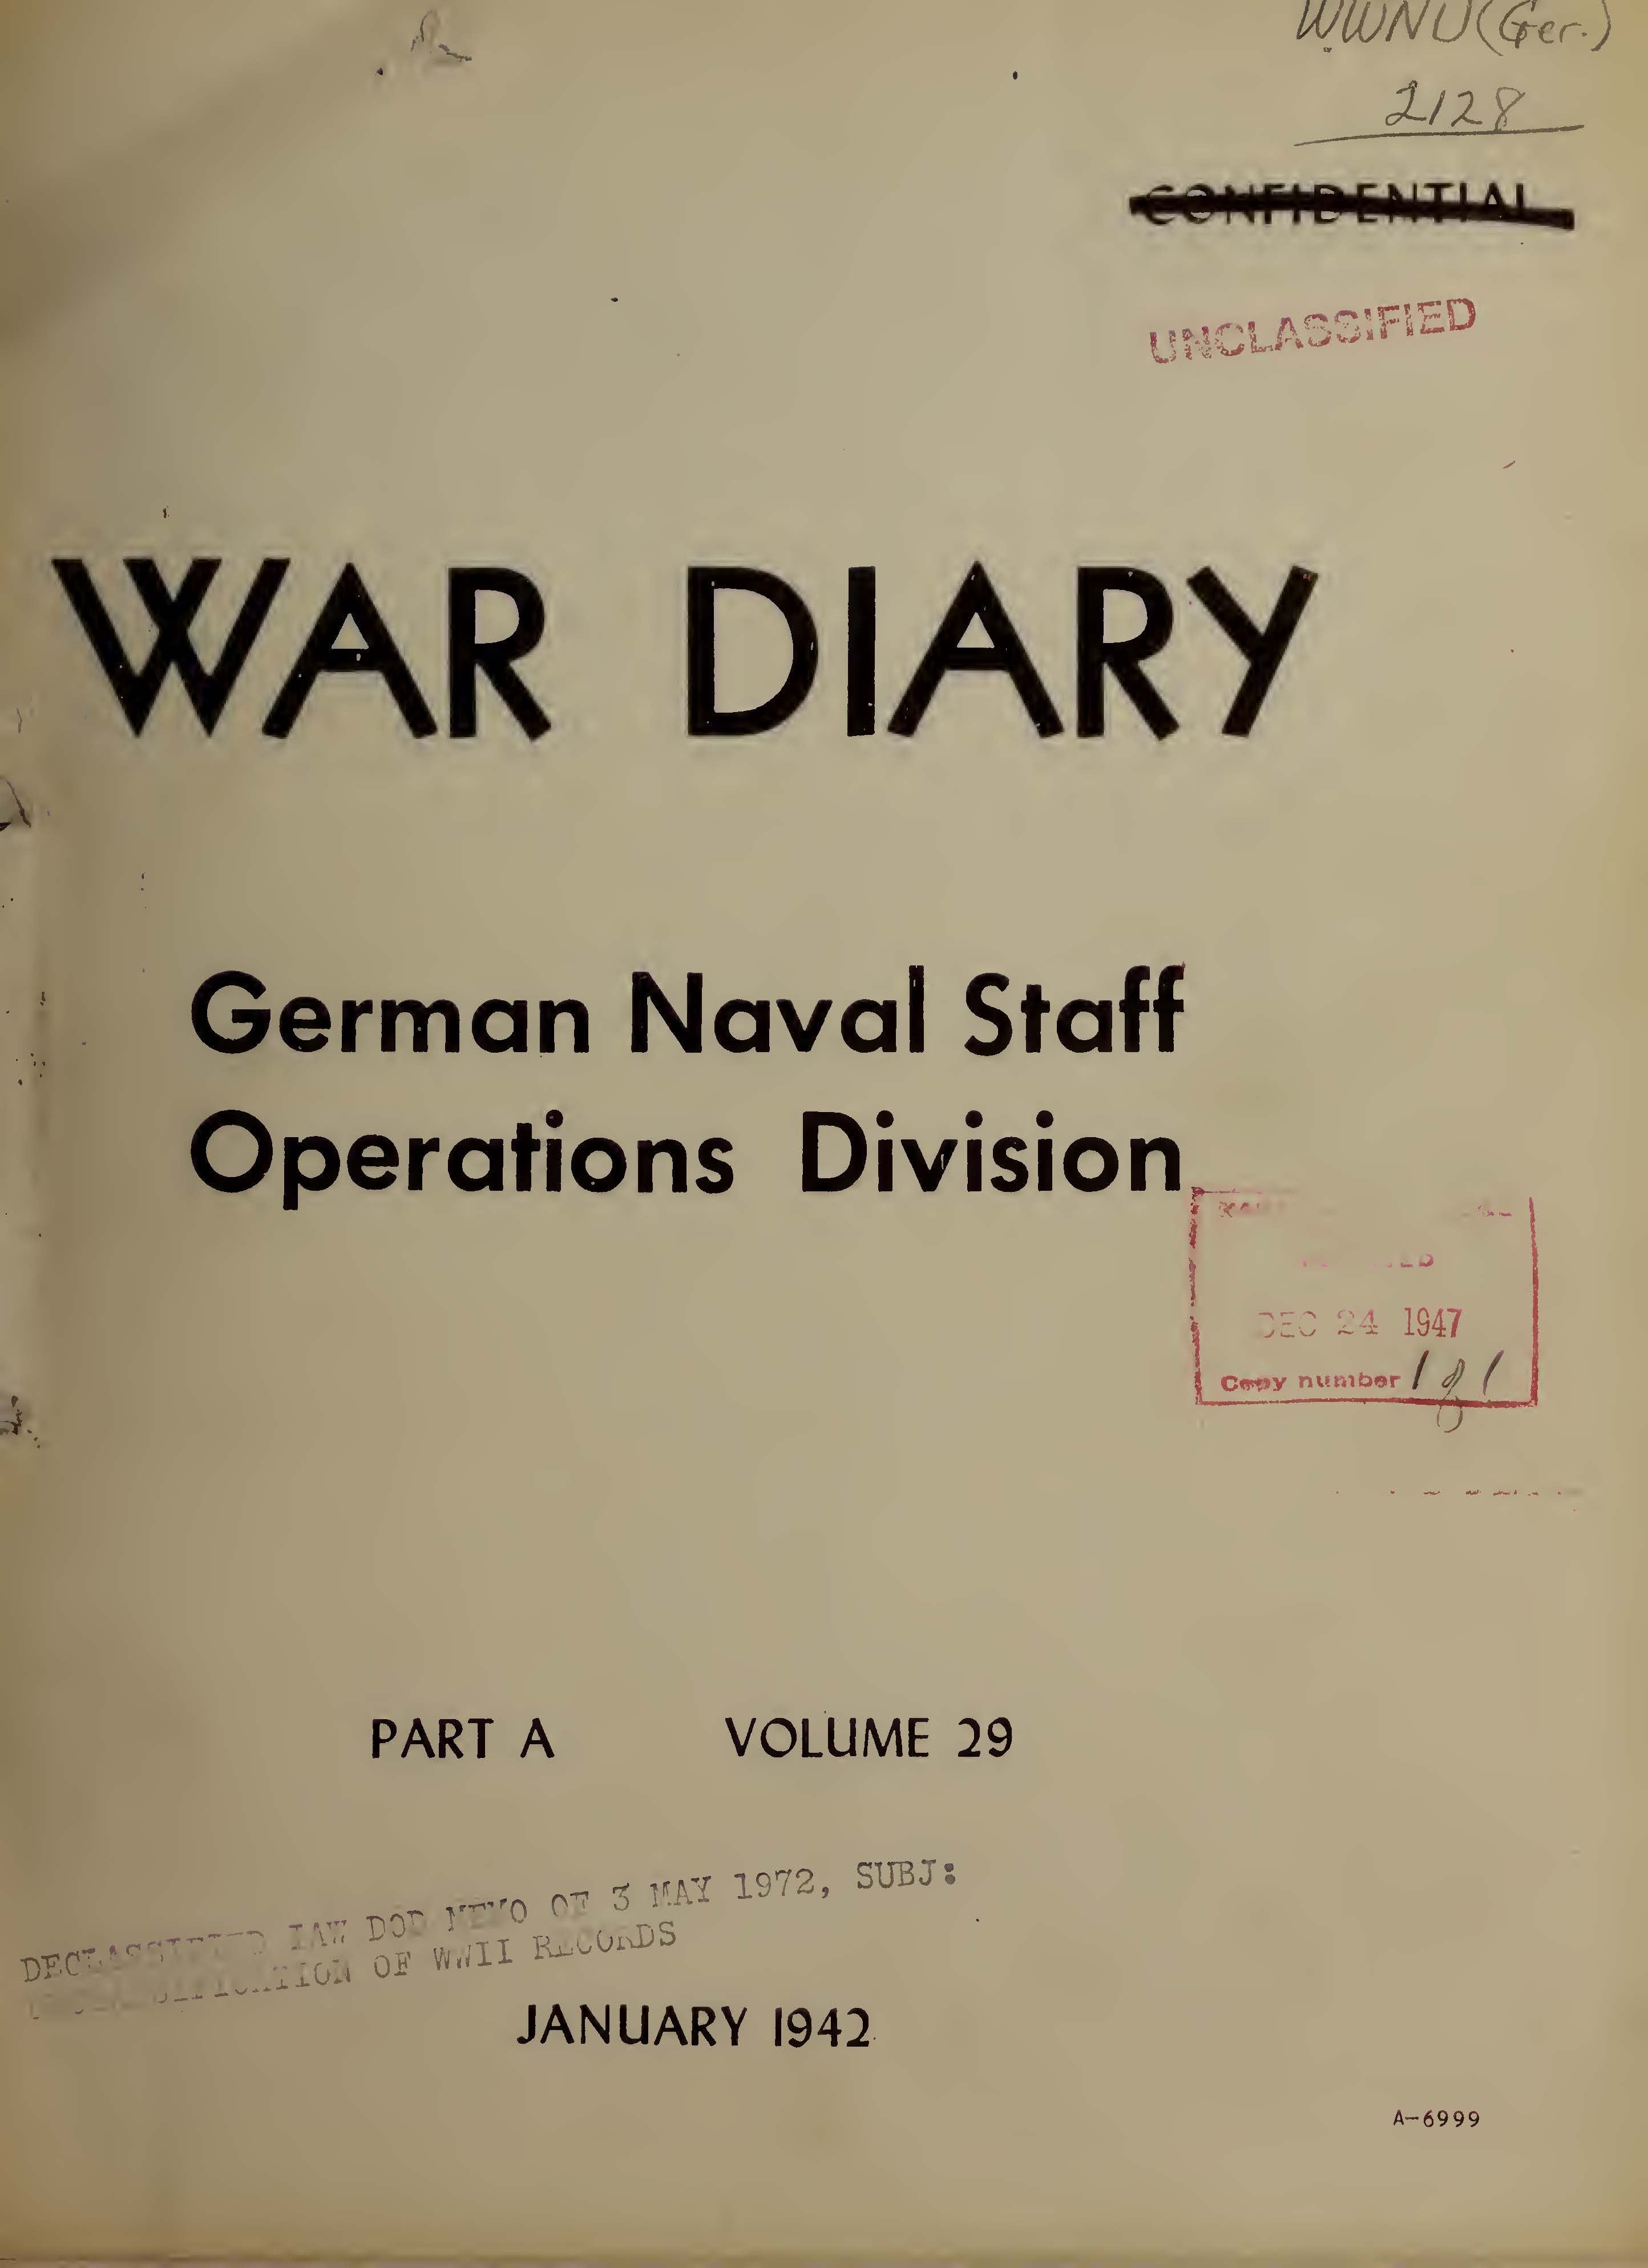 War Diary of German Naval Staff (Operations Division) Part A, Volume 29, January 1942